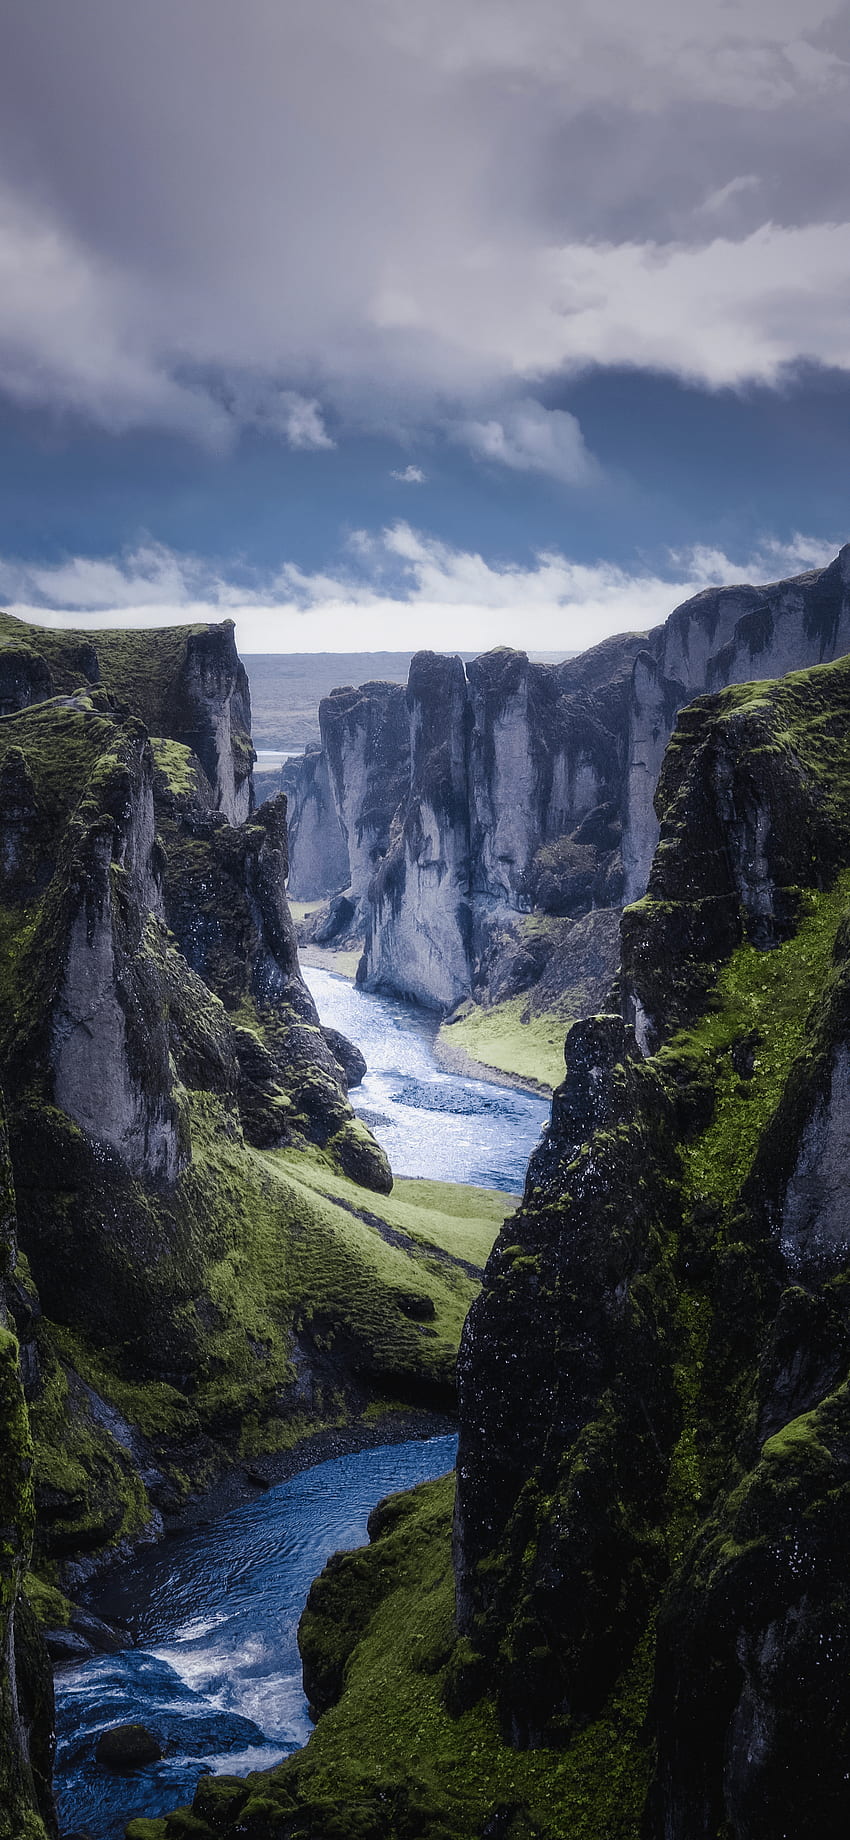 Iceland for iPhone 11, Pro Max, X, 8, 7, 6 - on 3, Iceland Canyon HD phone wallpaper